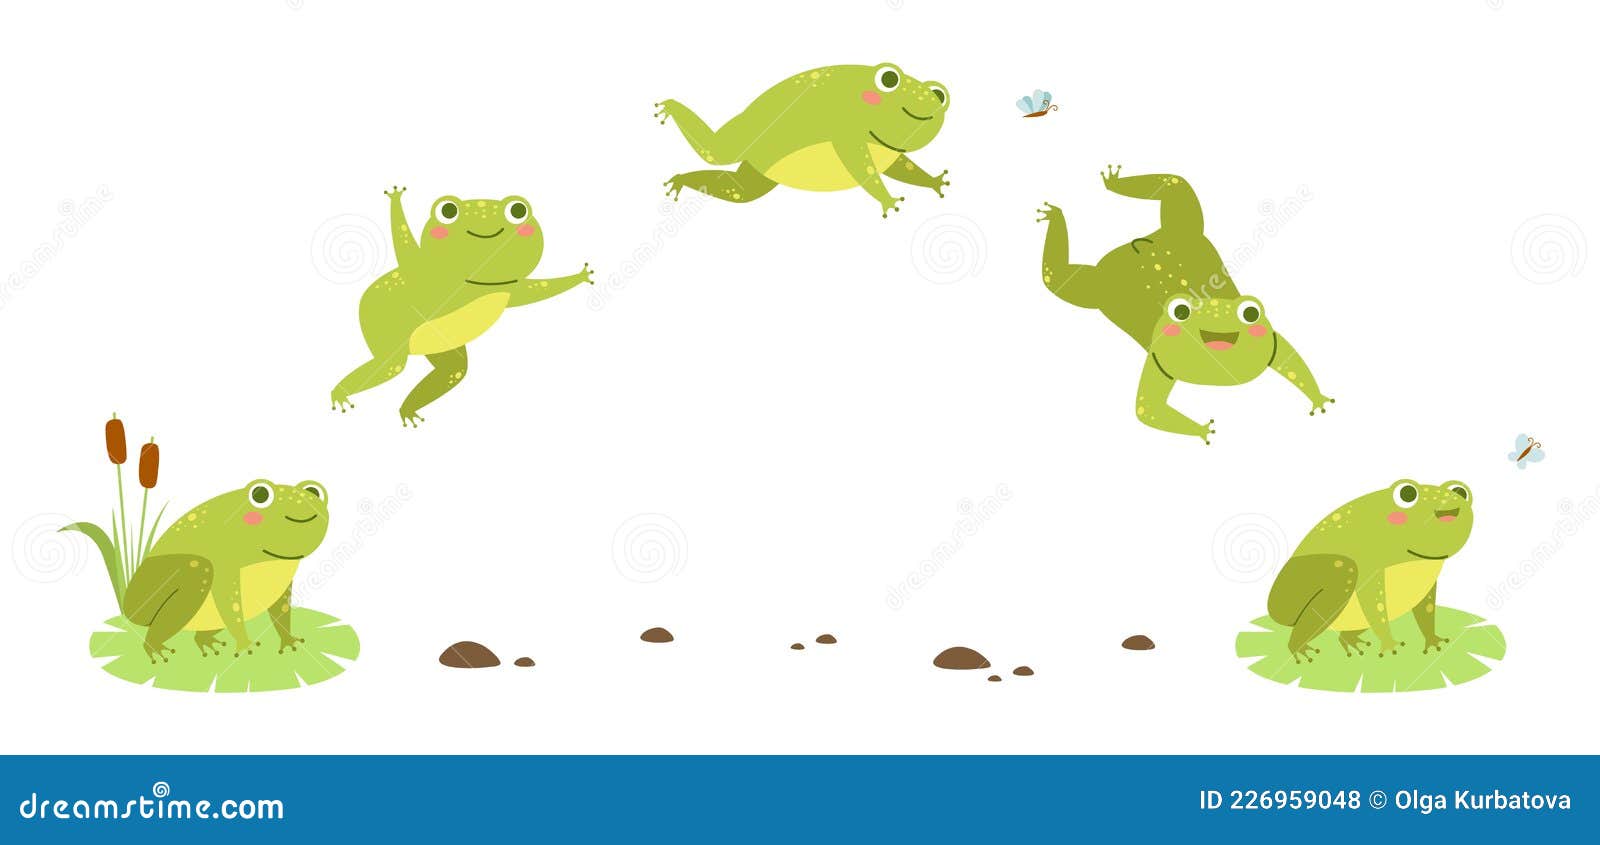 Frog Jump. Funny Toad Step Hop Sequences, Amphibian Character Moving  Animation Phases, Jumping Water Animal, 2d Stock Vector - Illustration of  froggy, joyful: 226959048